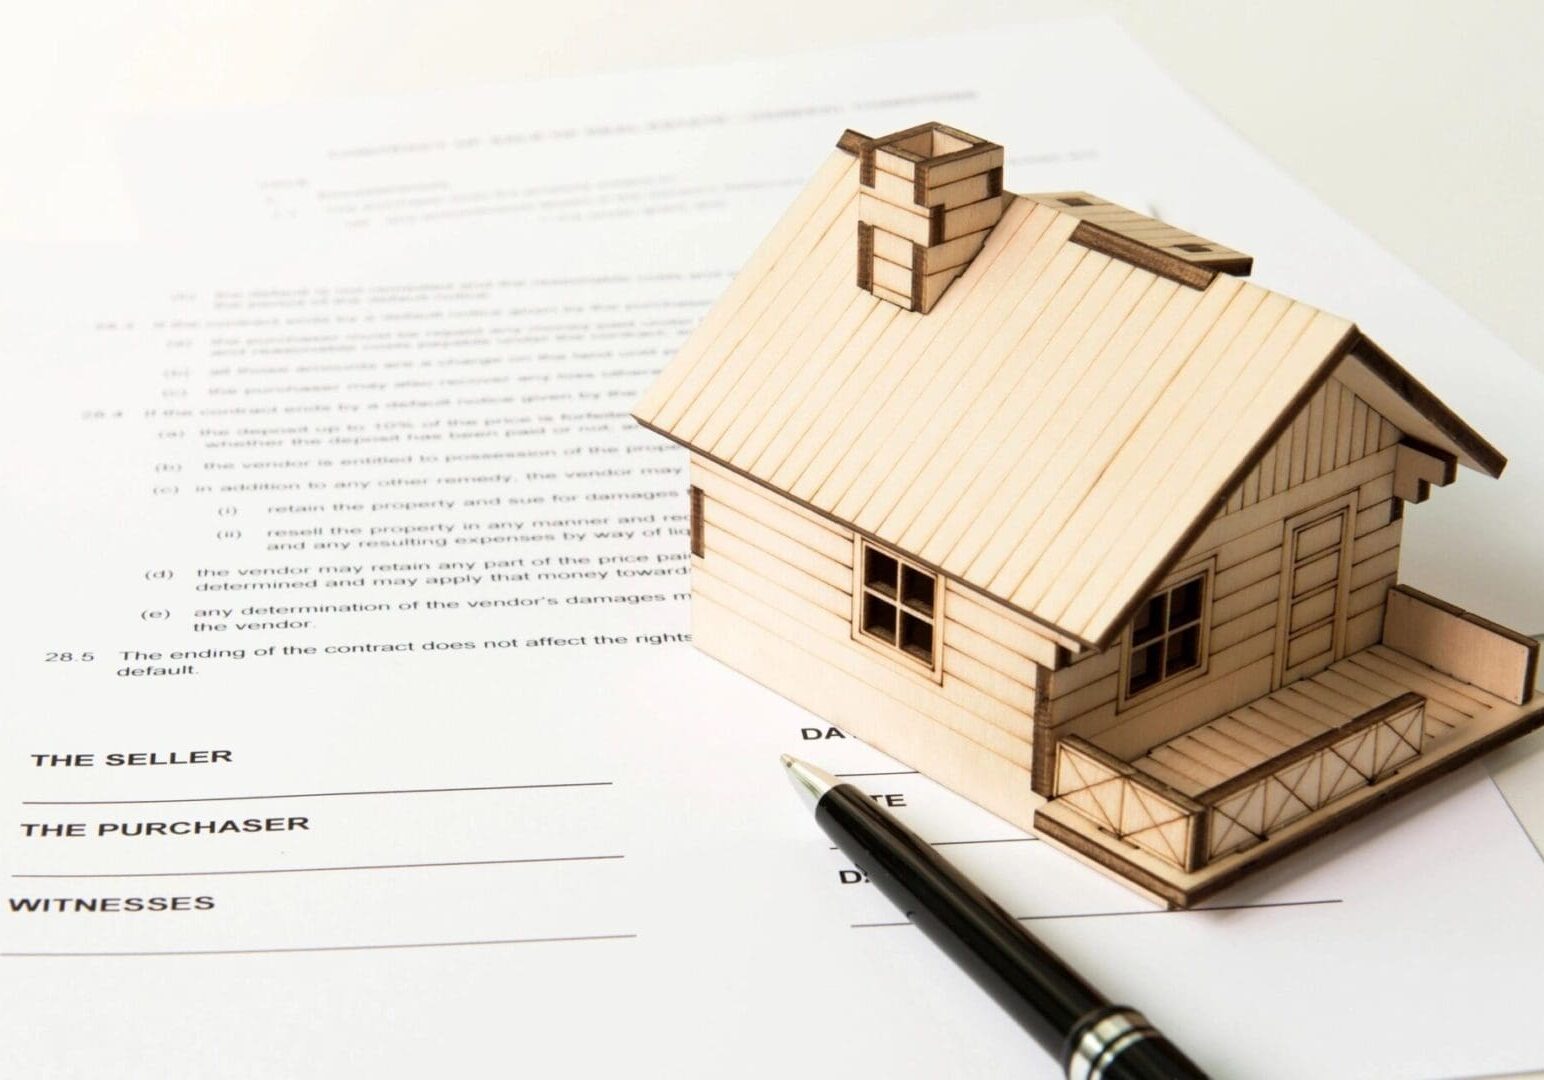 A wooden house model rests on a real estate contract with a black pen nearby, symbolizing property sale or agreement.